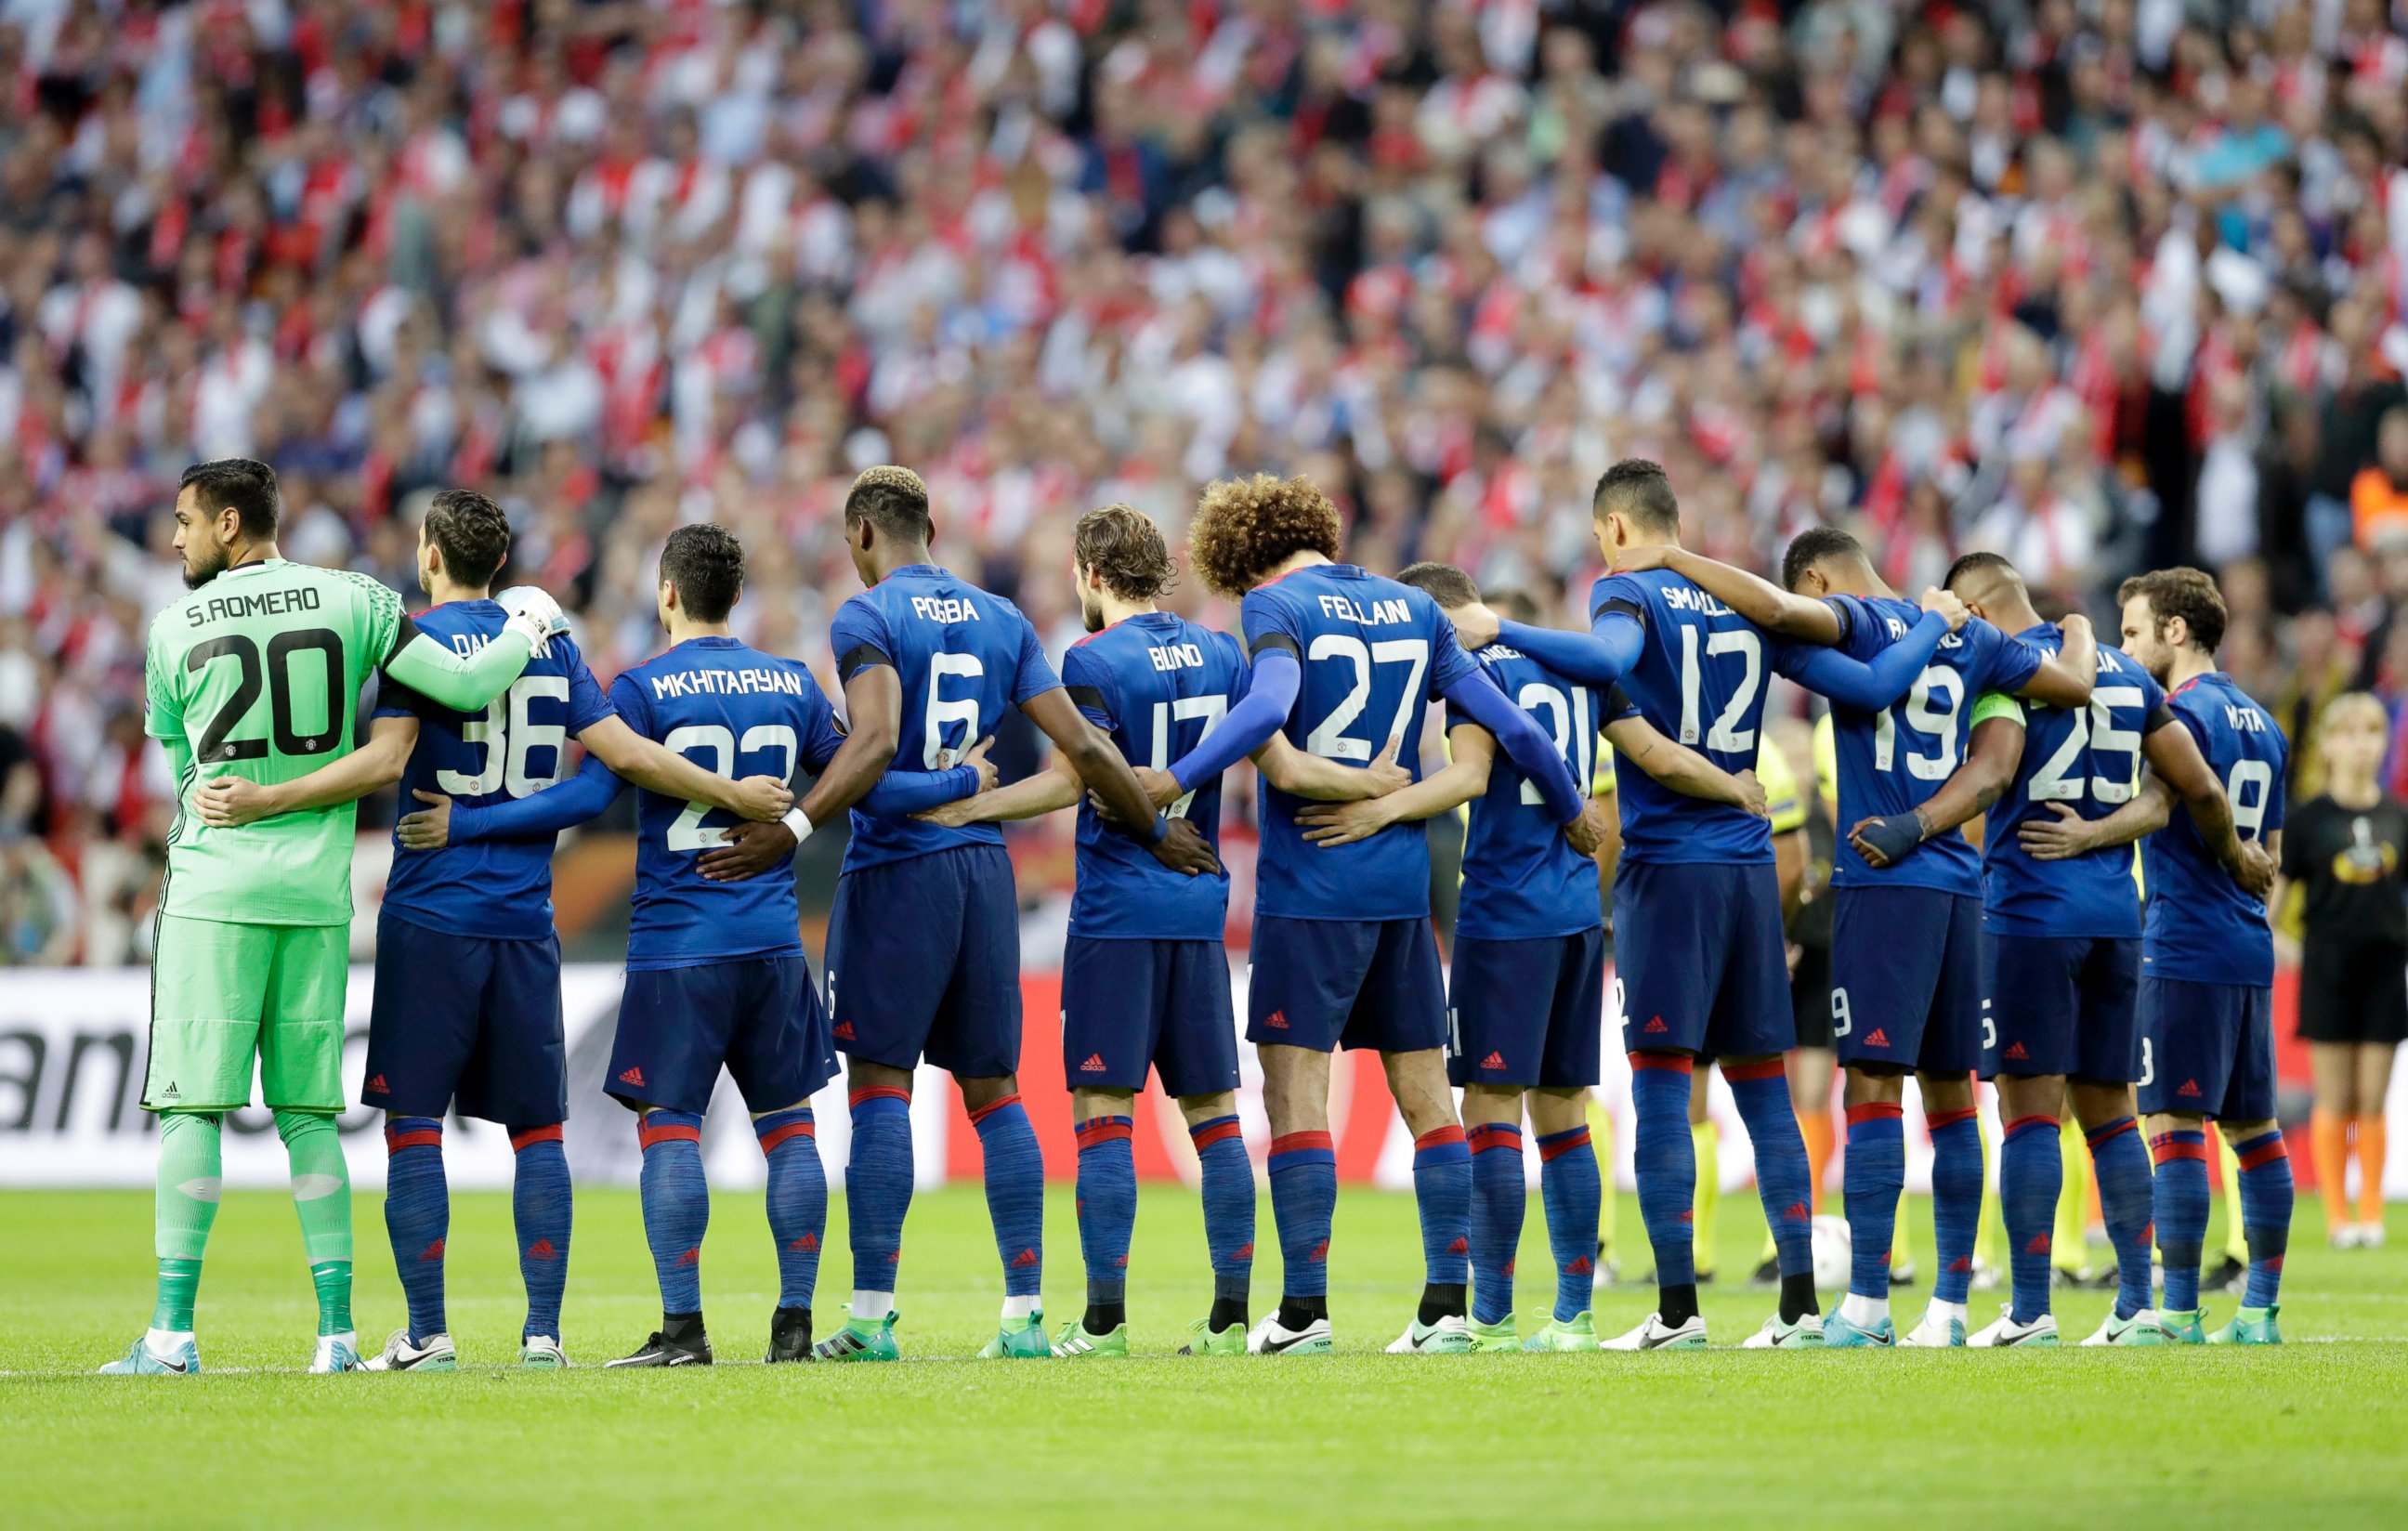 PHOTO: Manchester's team observe a minute of silence to commemorate the victims of the Manchester attack prior to the start of the Europa League final between Ajax Amsterdam and Manchester United at the Friends Arena in Stockholm, Sweden, May 24, 2017.